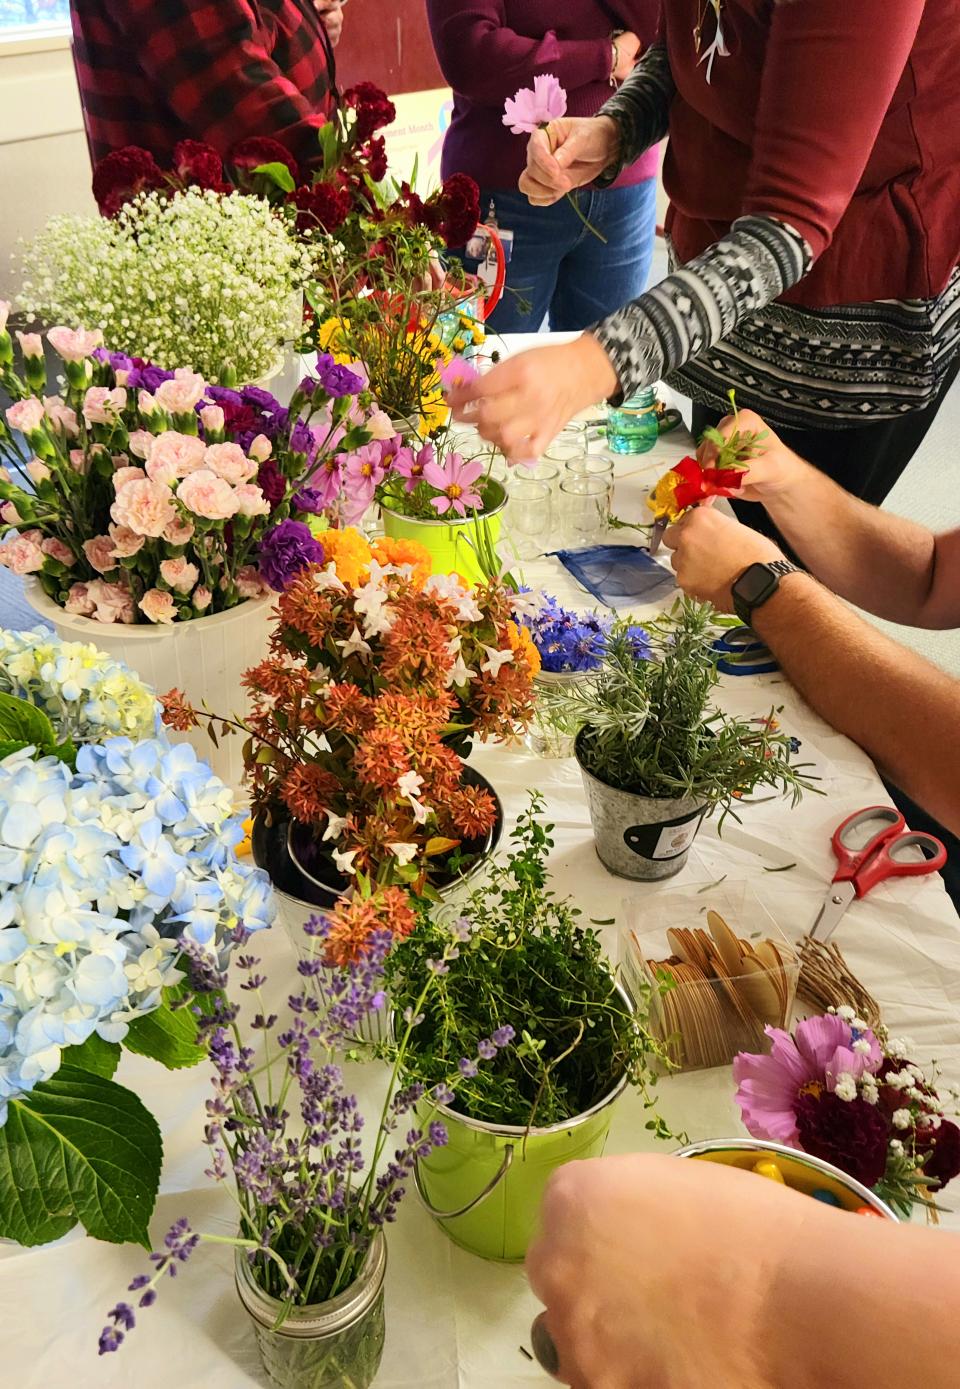 Horticultural Therapy is beneficial for people of all ages and all walks of life in a wide variety of rehabilitative, health care and residential settings, providing benefits using a wide variety of plants and related materials in purposeful and meaningful activities, gardens, greenhouses and indoor spaces.